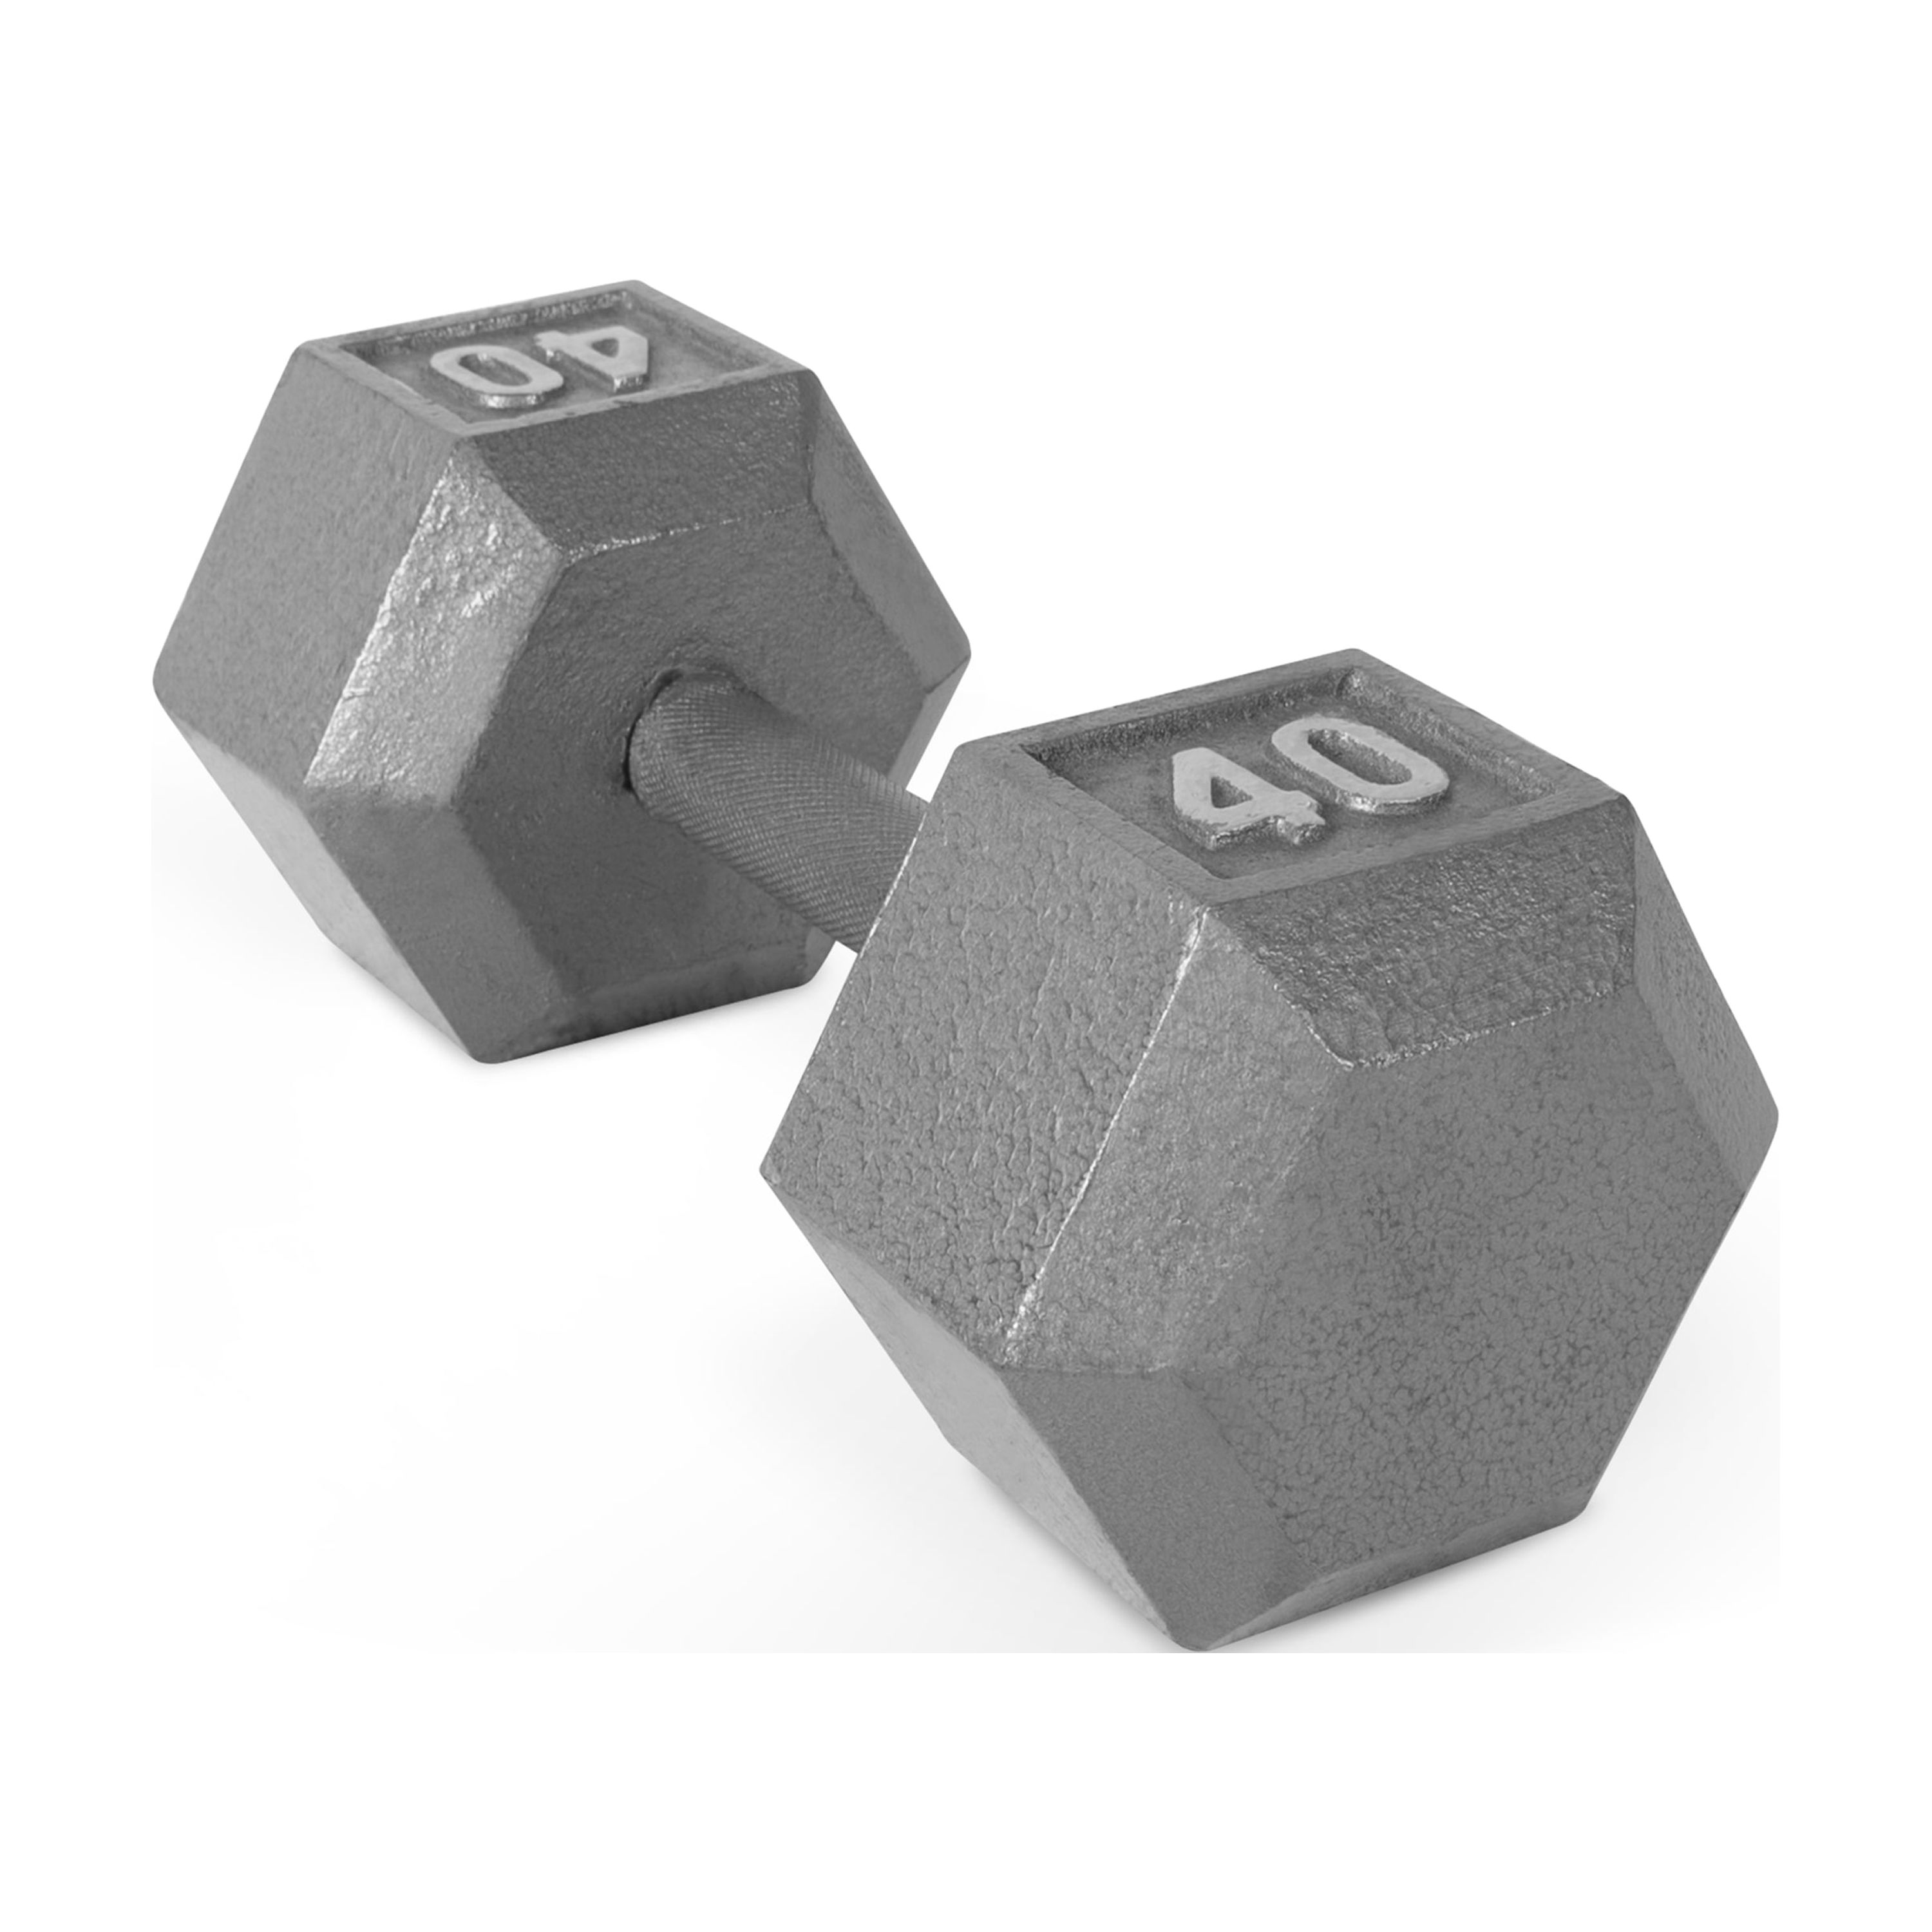 CAP Barbell 40lb Cast Iron Hex Dumbbell, Single - image 1 of 6